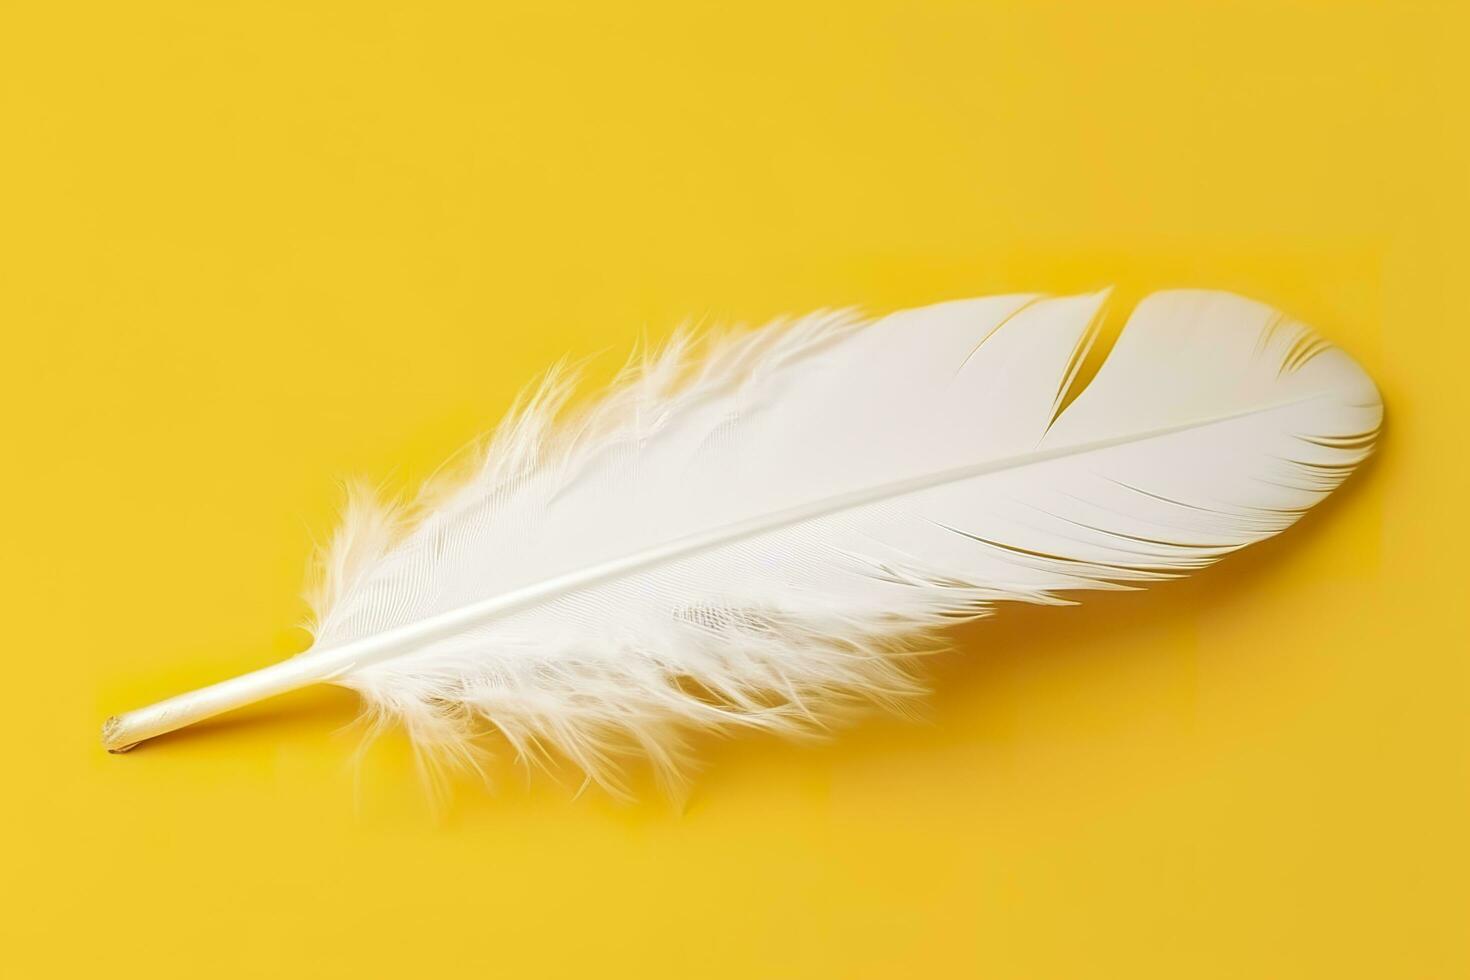 Fluffy Background Yellow Feathers Stock Photo, Picture and Royalty Free  Image. Image 26615588.